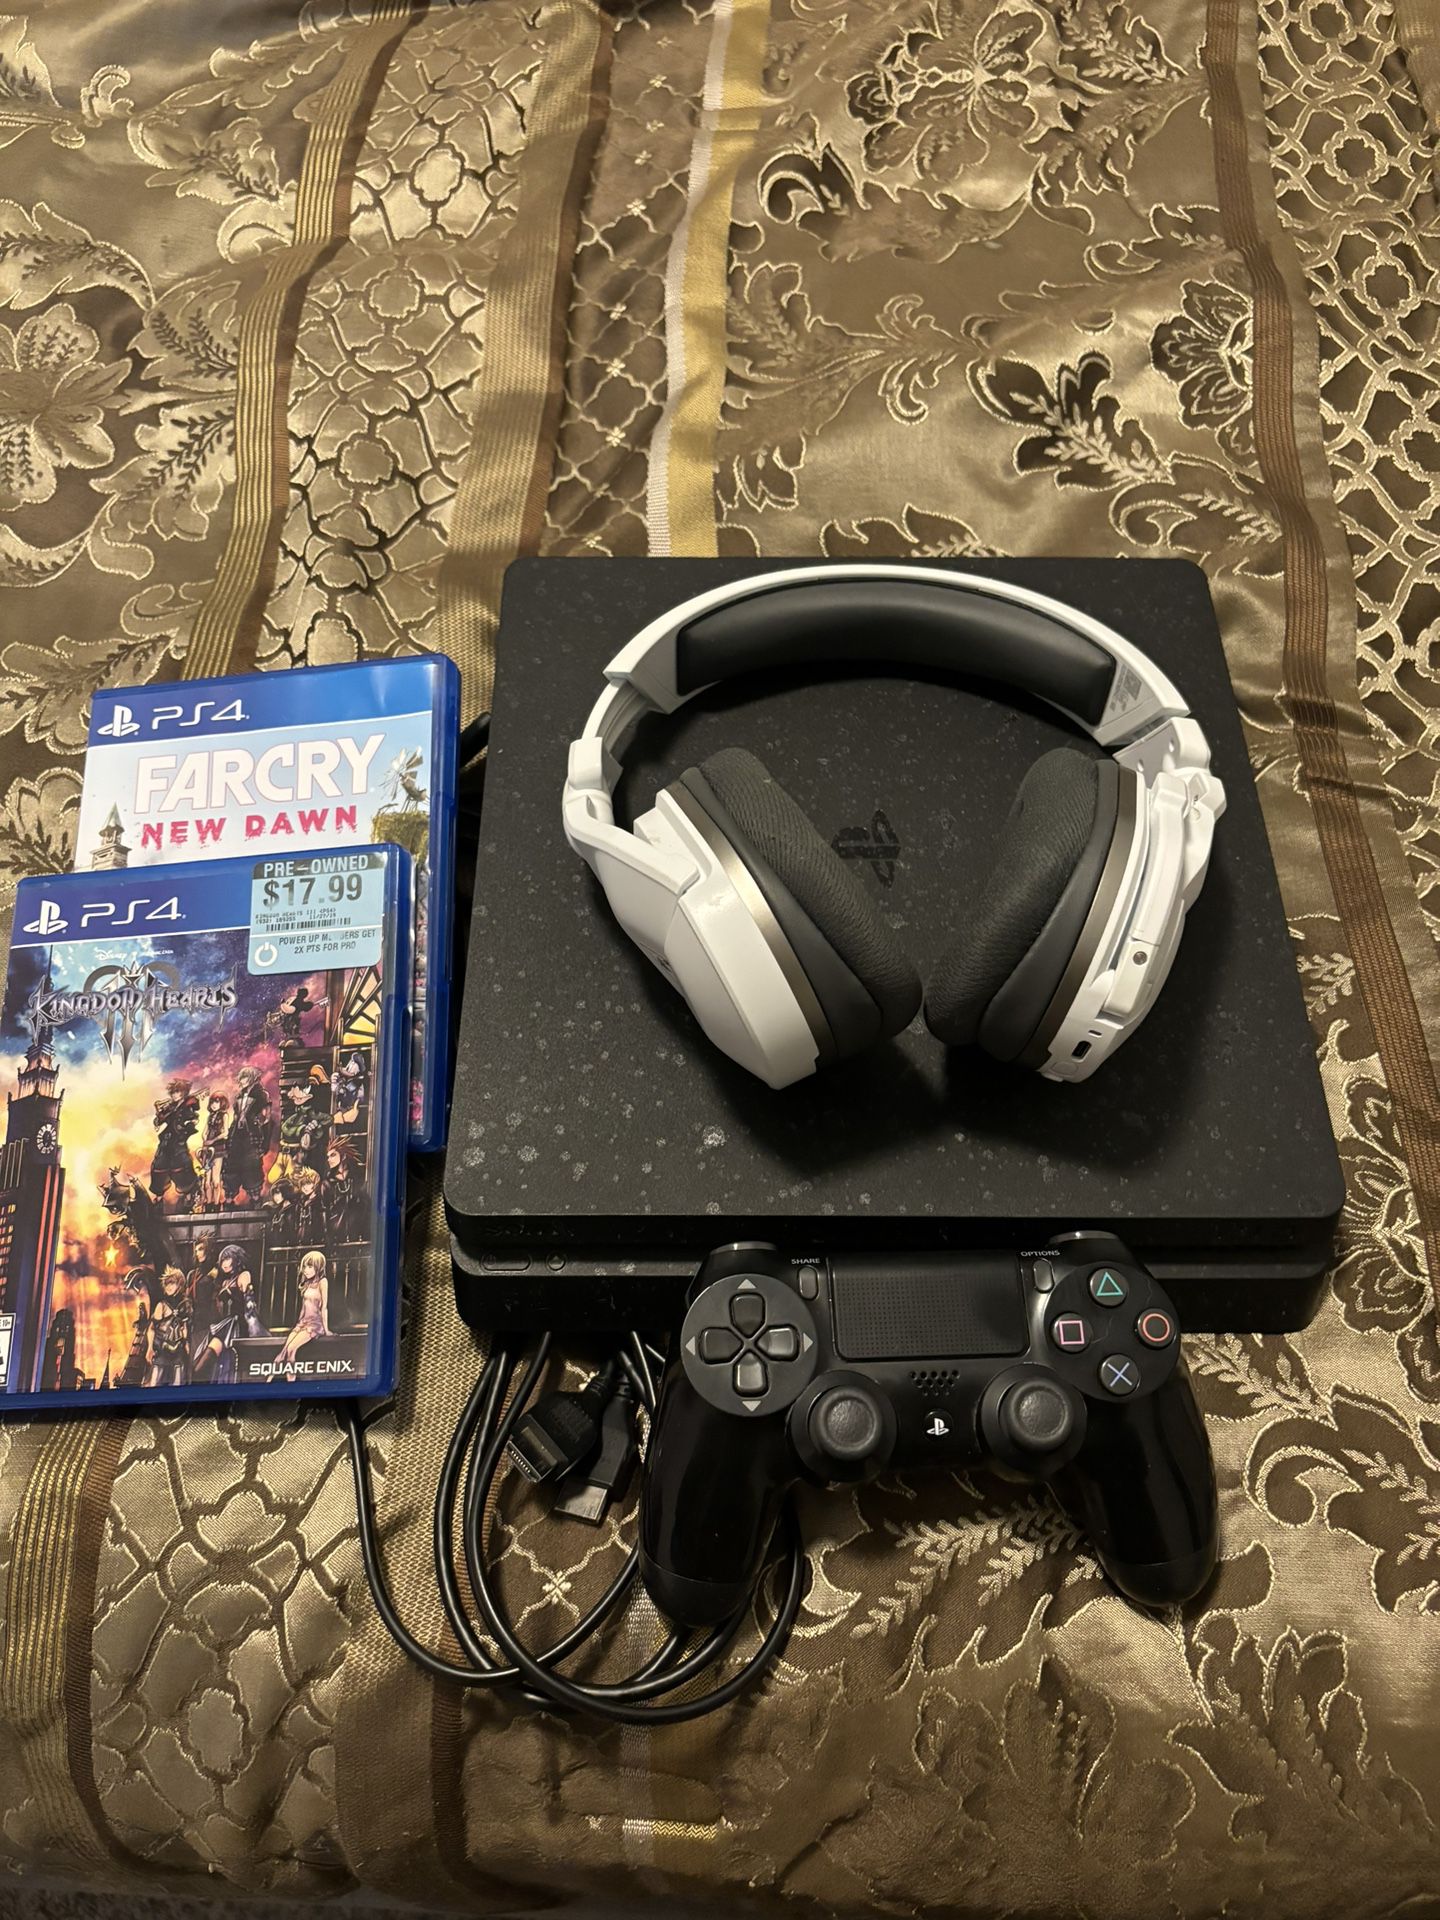 PlayStation 4 With Cords, Controller, Turtle Beach Headphones, And 2 Games